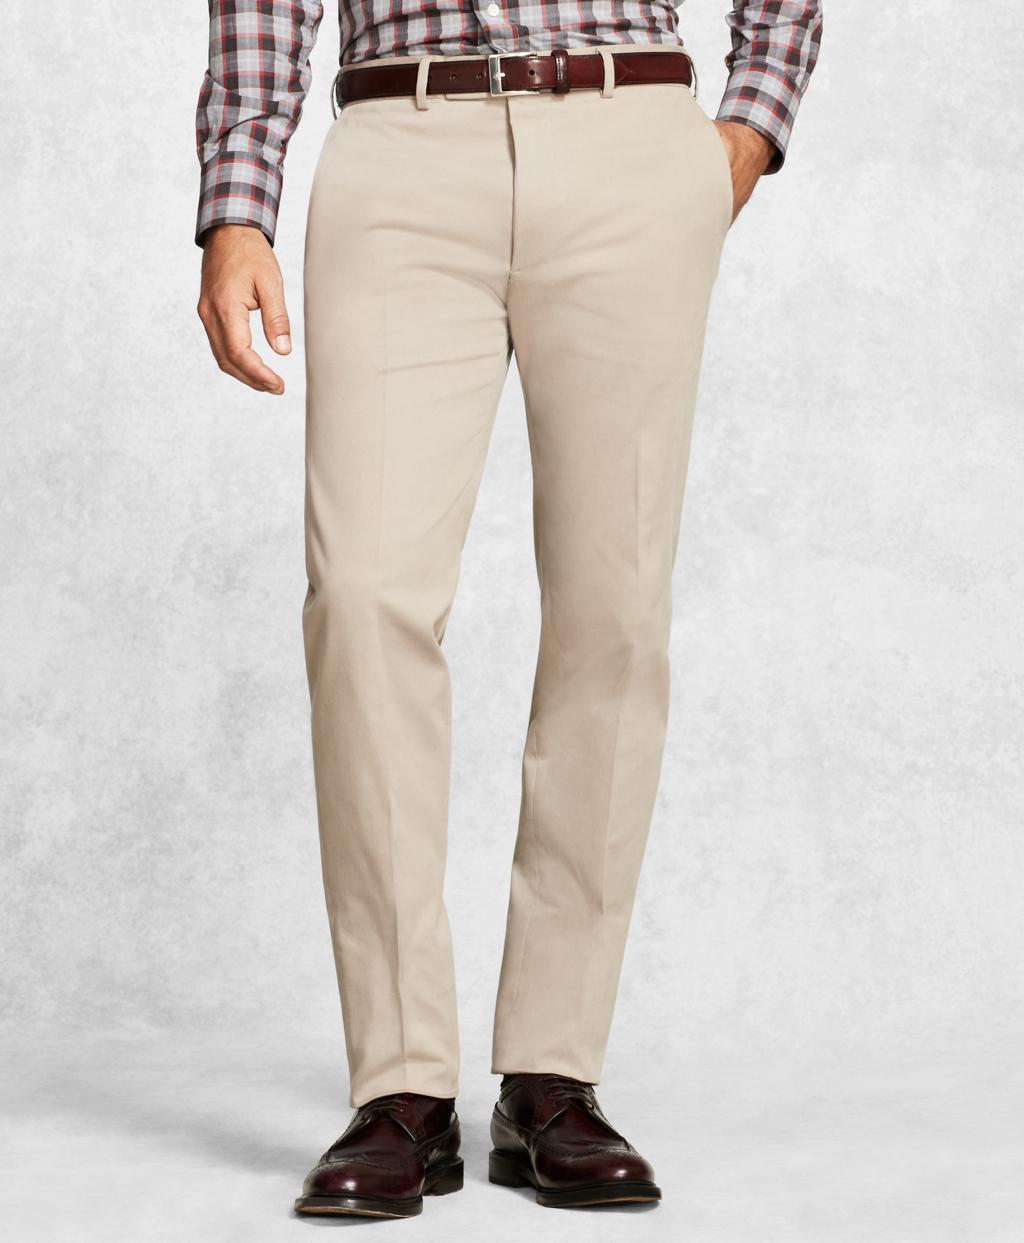 Brooks Brothers Cotton Golden Fleece Solid Khaki Dress Trousers in ...